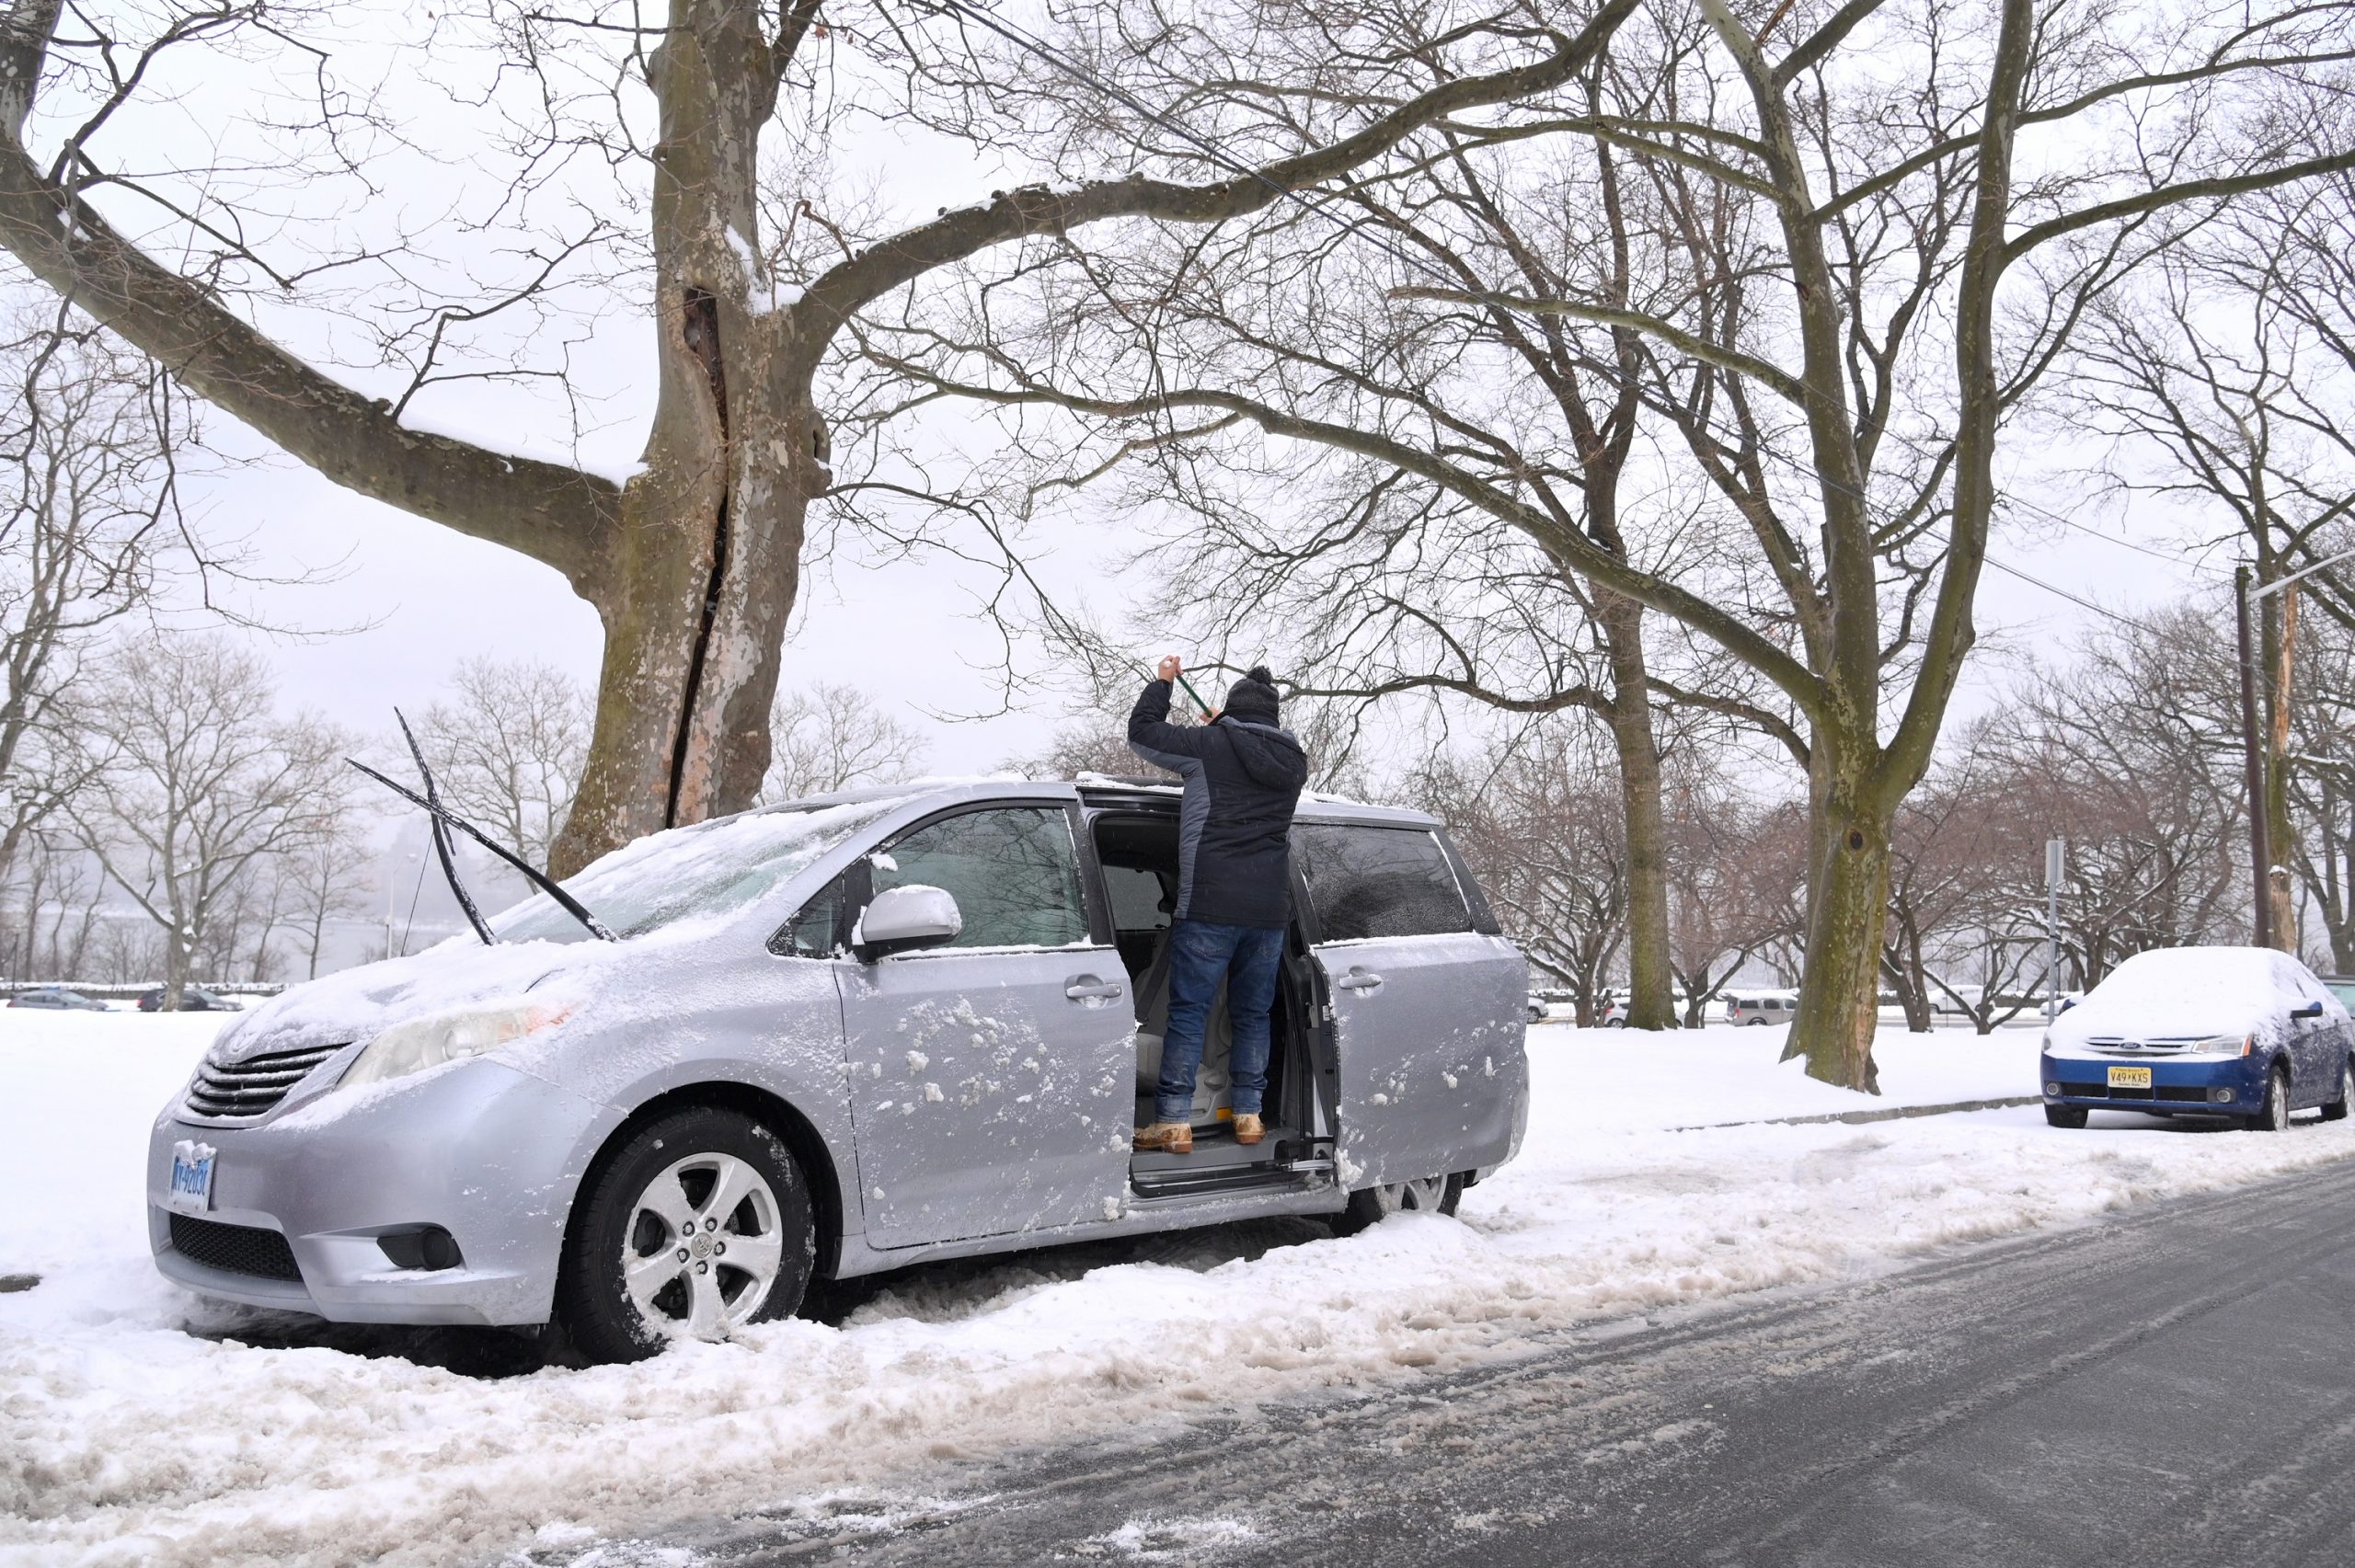 A man cleans the snow off of his minivan parked on a street corner